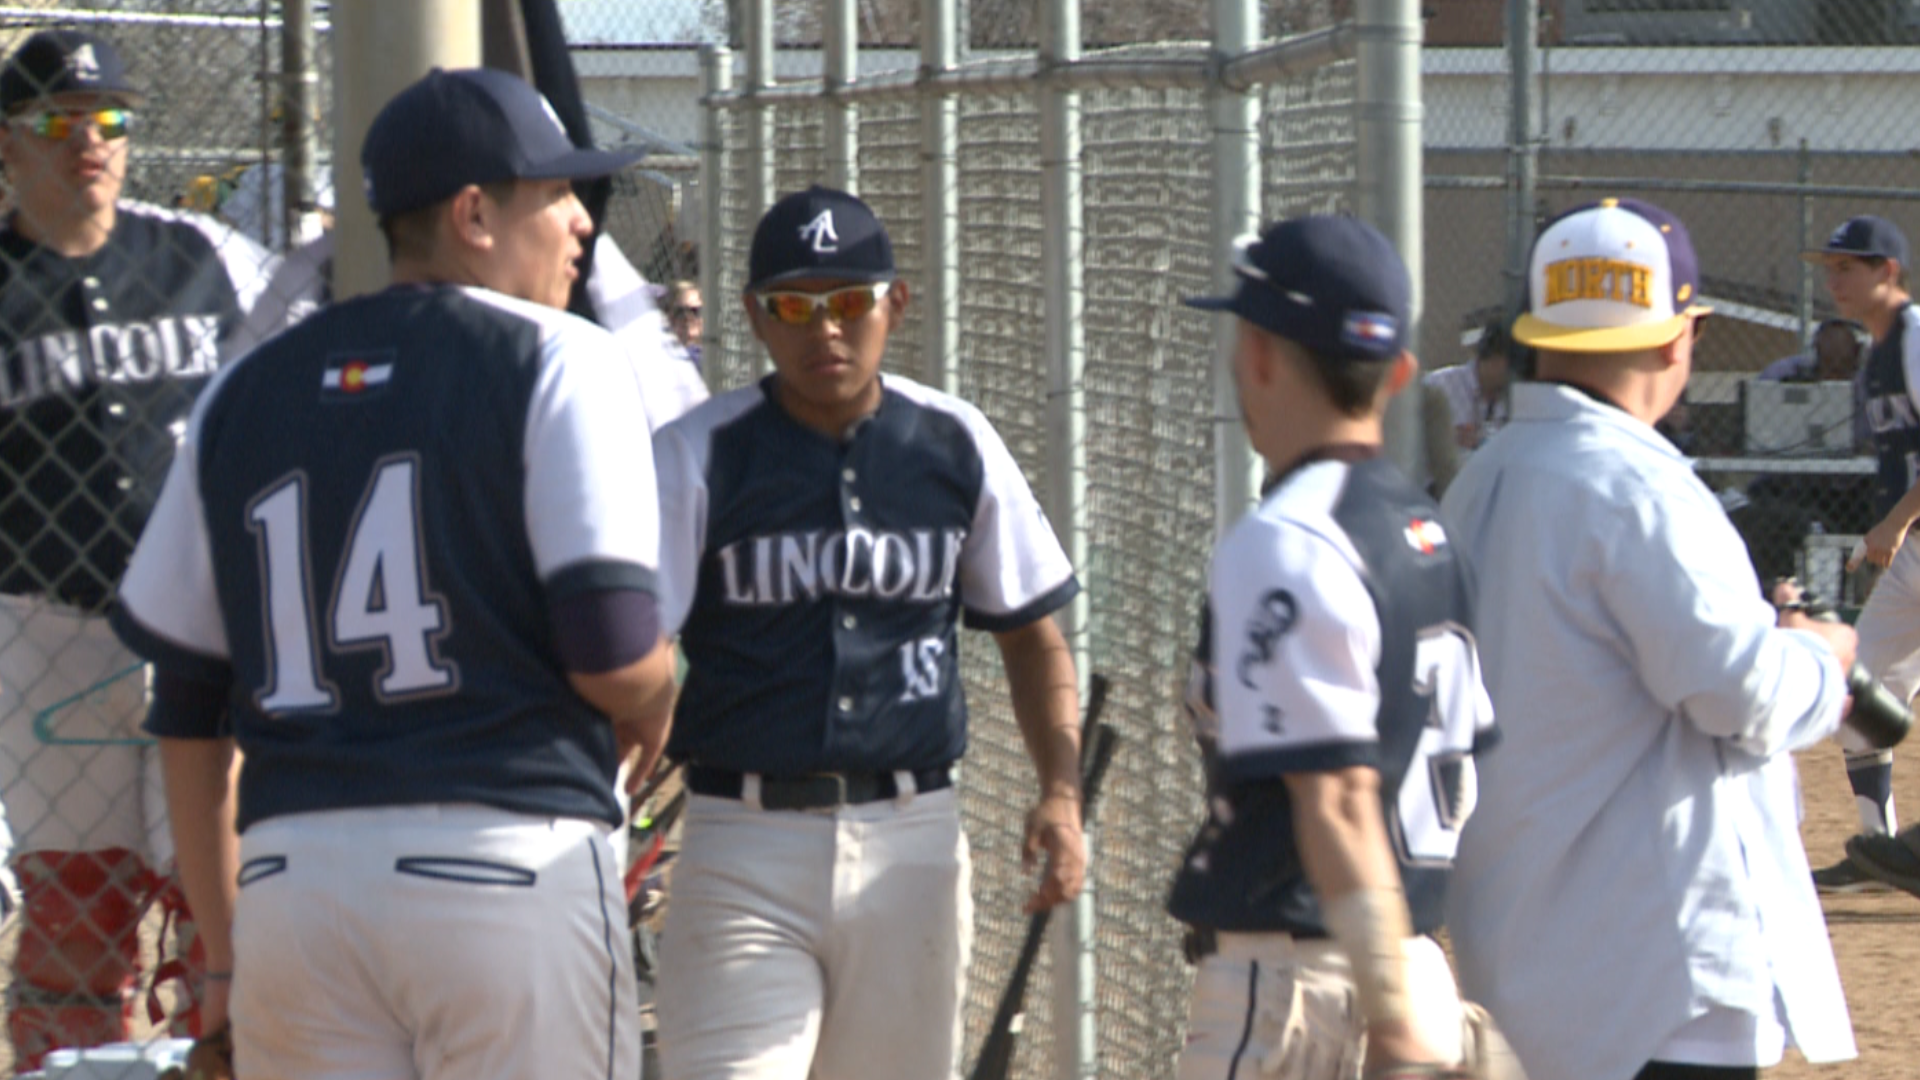 The Lancers fended off the Vikings' comeback attempt on Thursday to take a lead in the Denver Prep League standings.